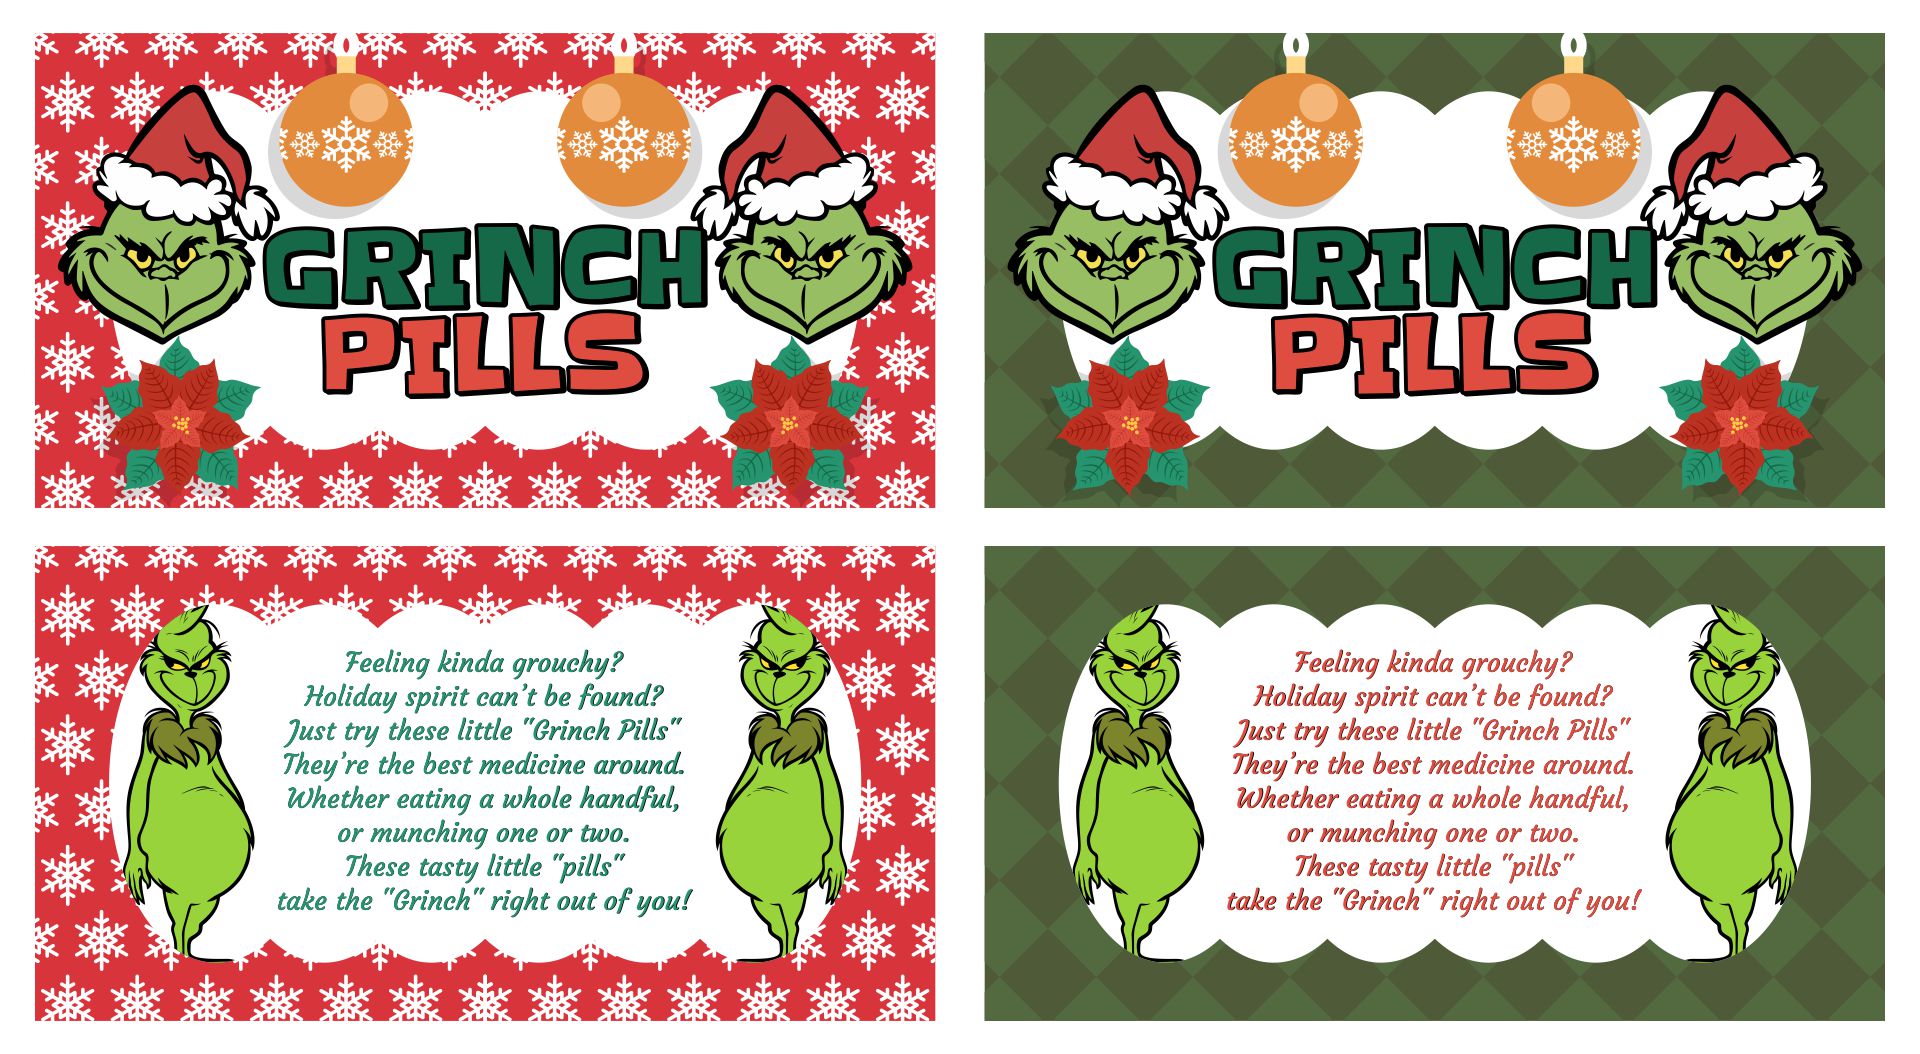 5 Best Images of Grinch Pills Printable Pattern Grinch Pills